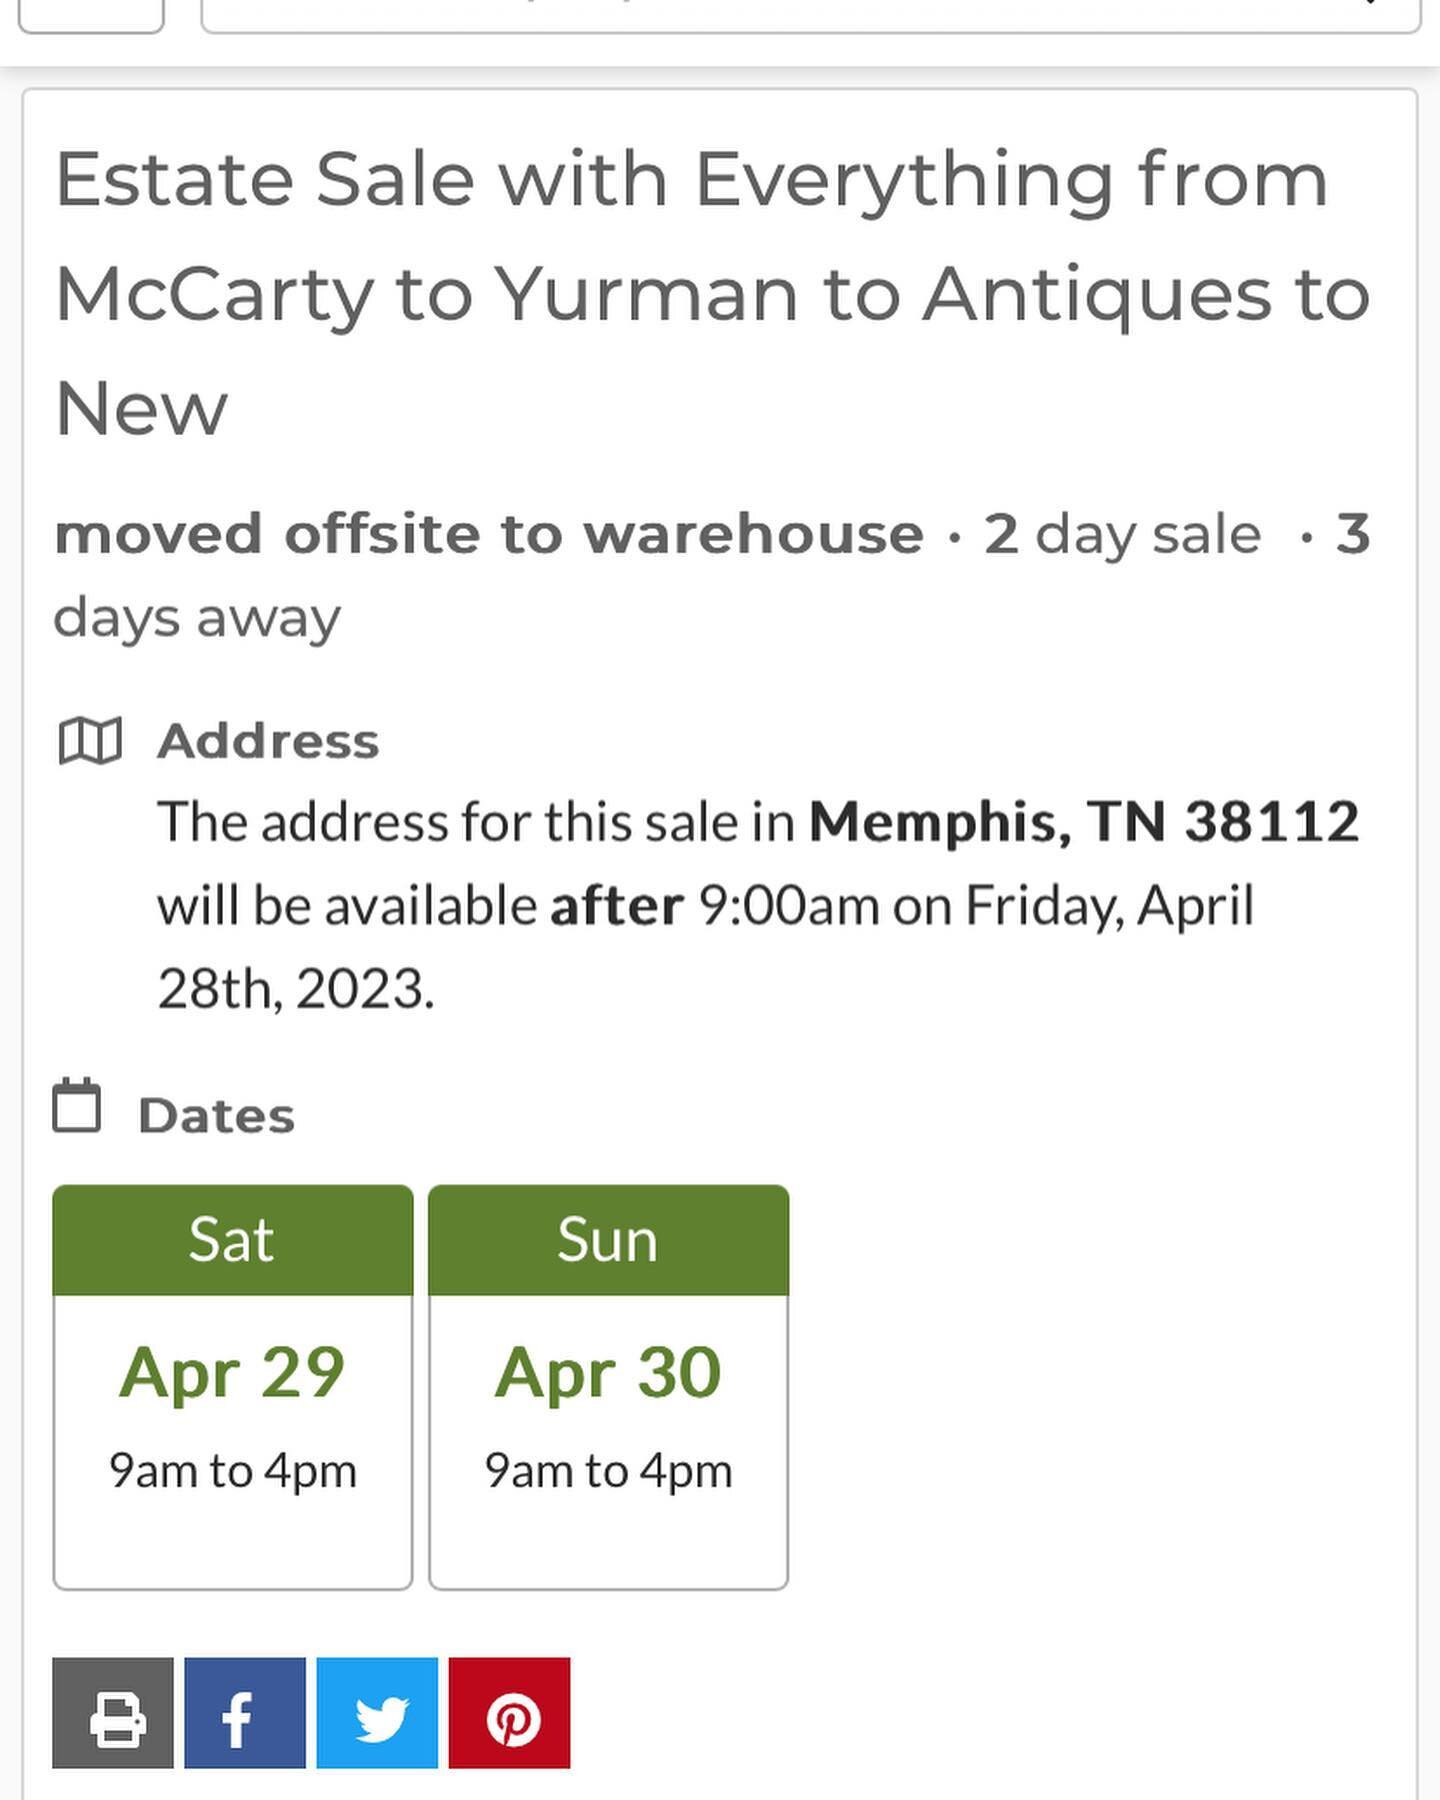 This Saturday &amp; Sunday will not only be our warehouse sale at Cotton Row Weekends, 174 Collins Street Memphis TN, but also a special Estate Sale will be going on!

Stop by from 9am till 4pm both days. See details in link. 

Cotton Row Weekends lo